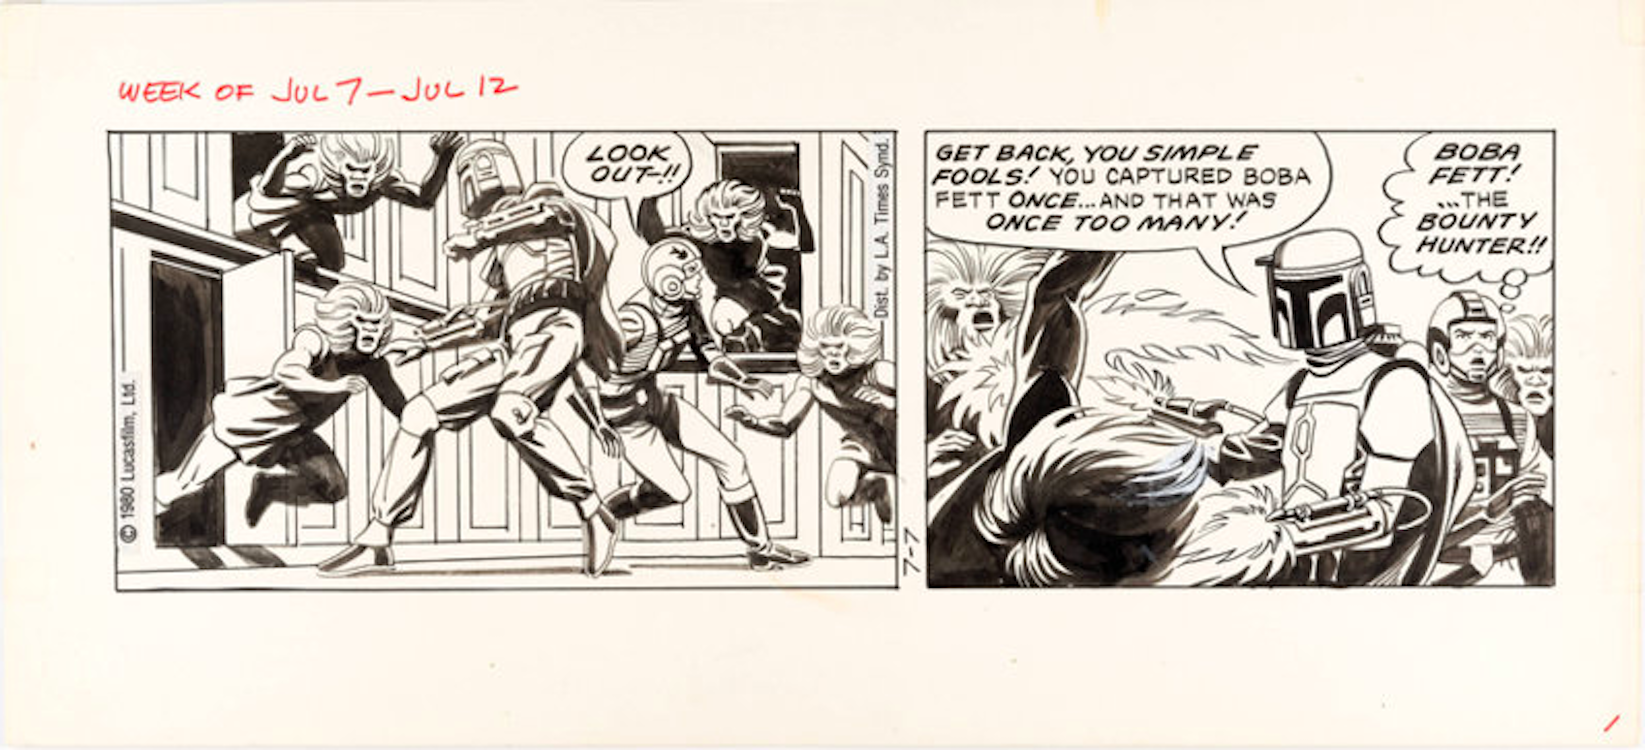 Star Wars Daily Comic Strip by Dave Stevens sold for $1,910. Click here to get your original art appraised.